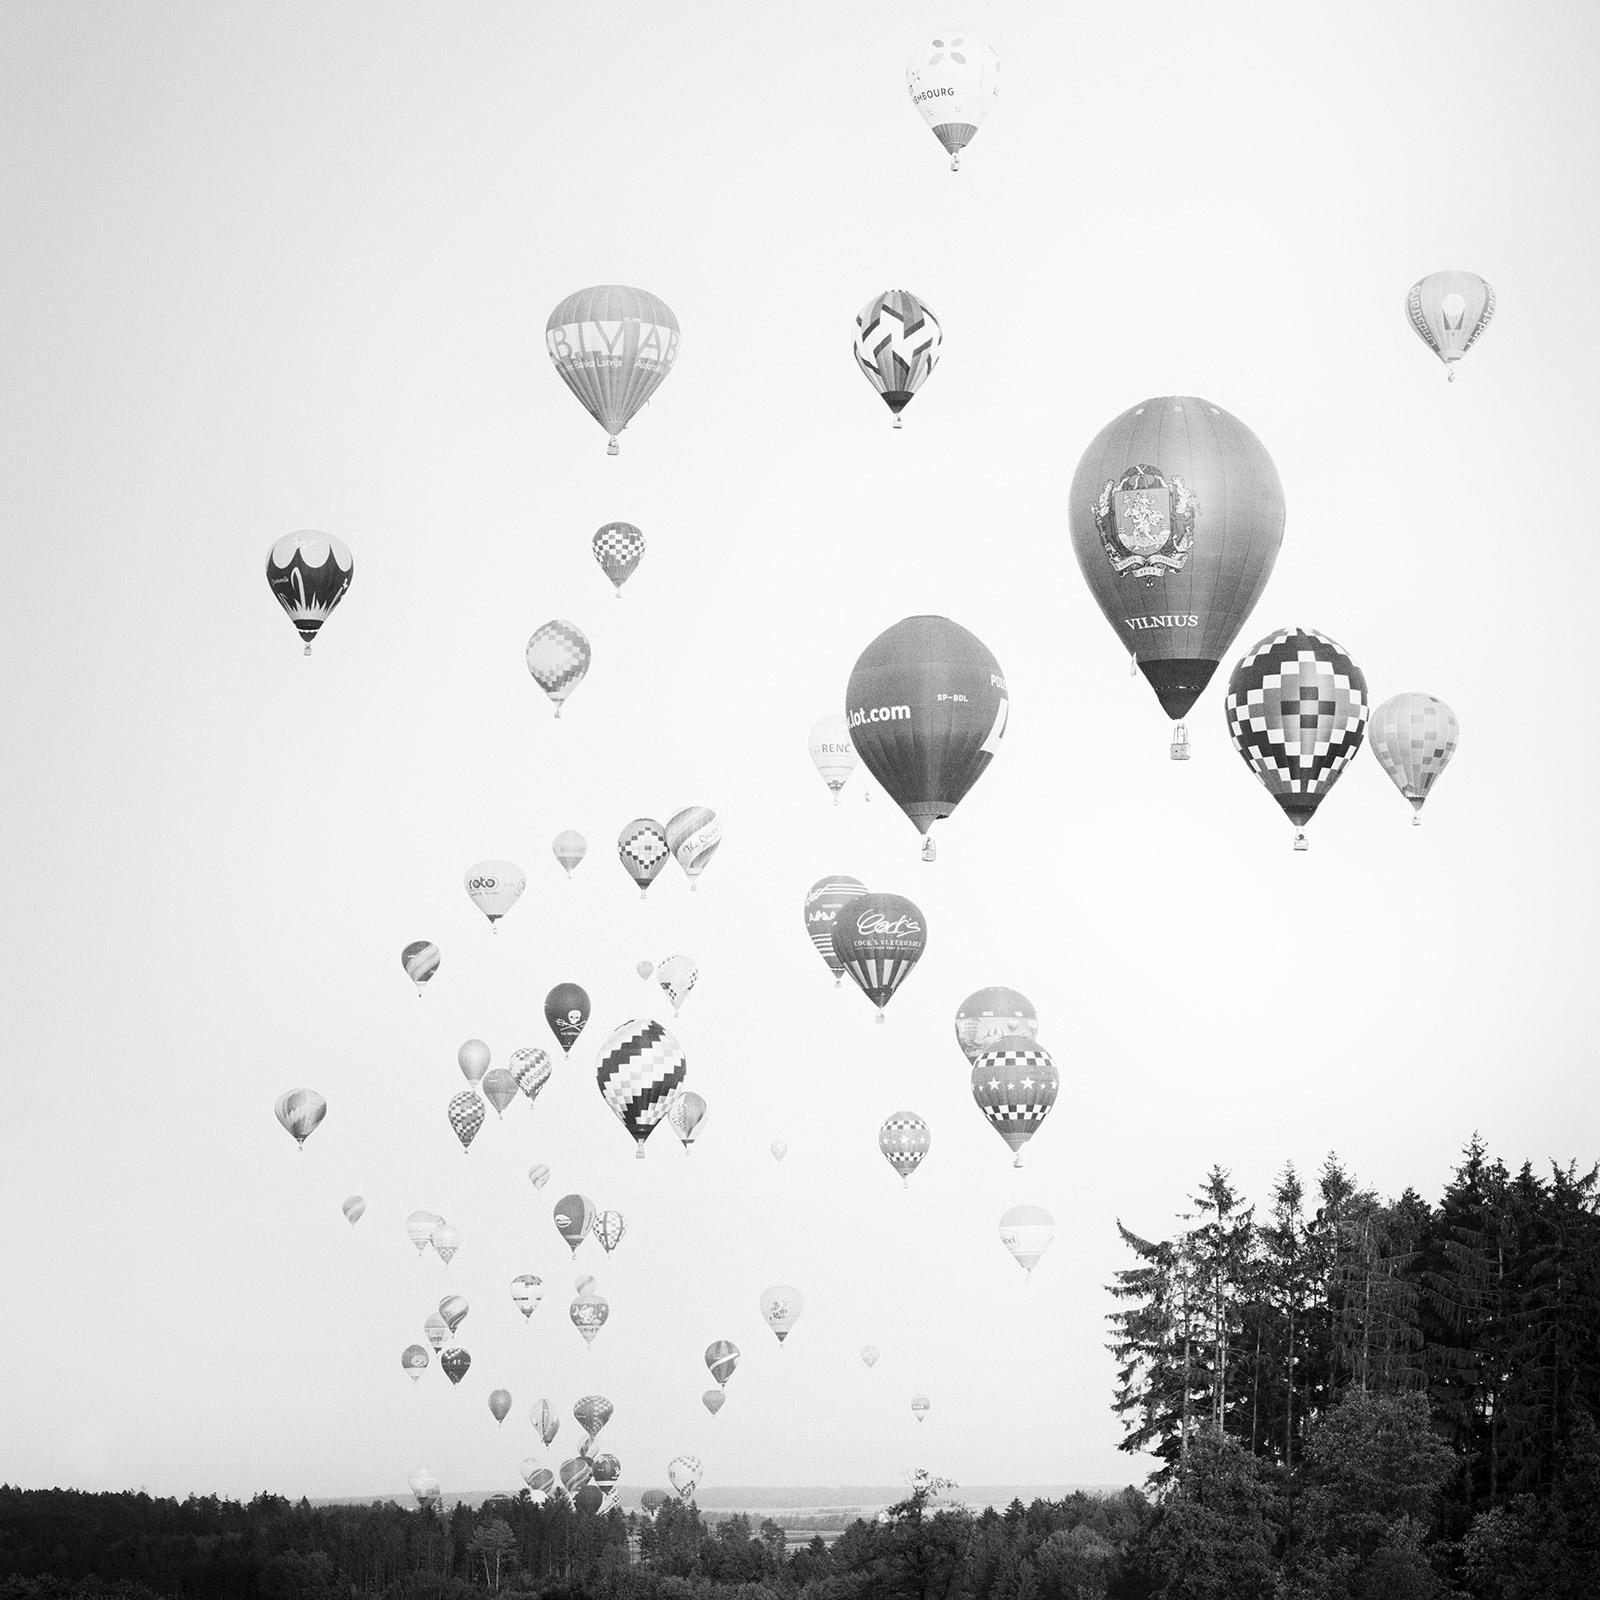 Gerald Berghammer, Ina Forstinger Black and White Photograph - Hot Air Balloon World Championship, black and white art photography, landscape